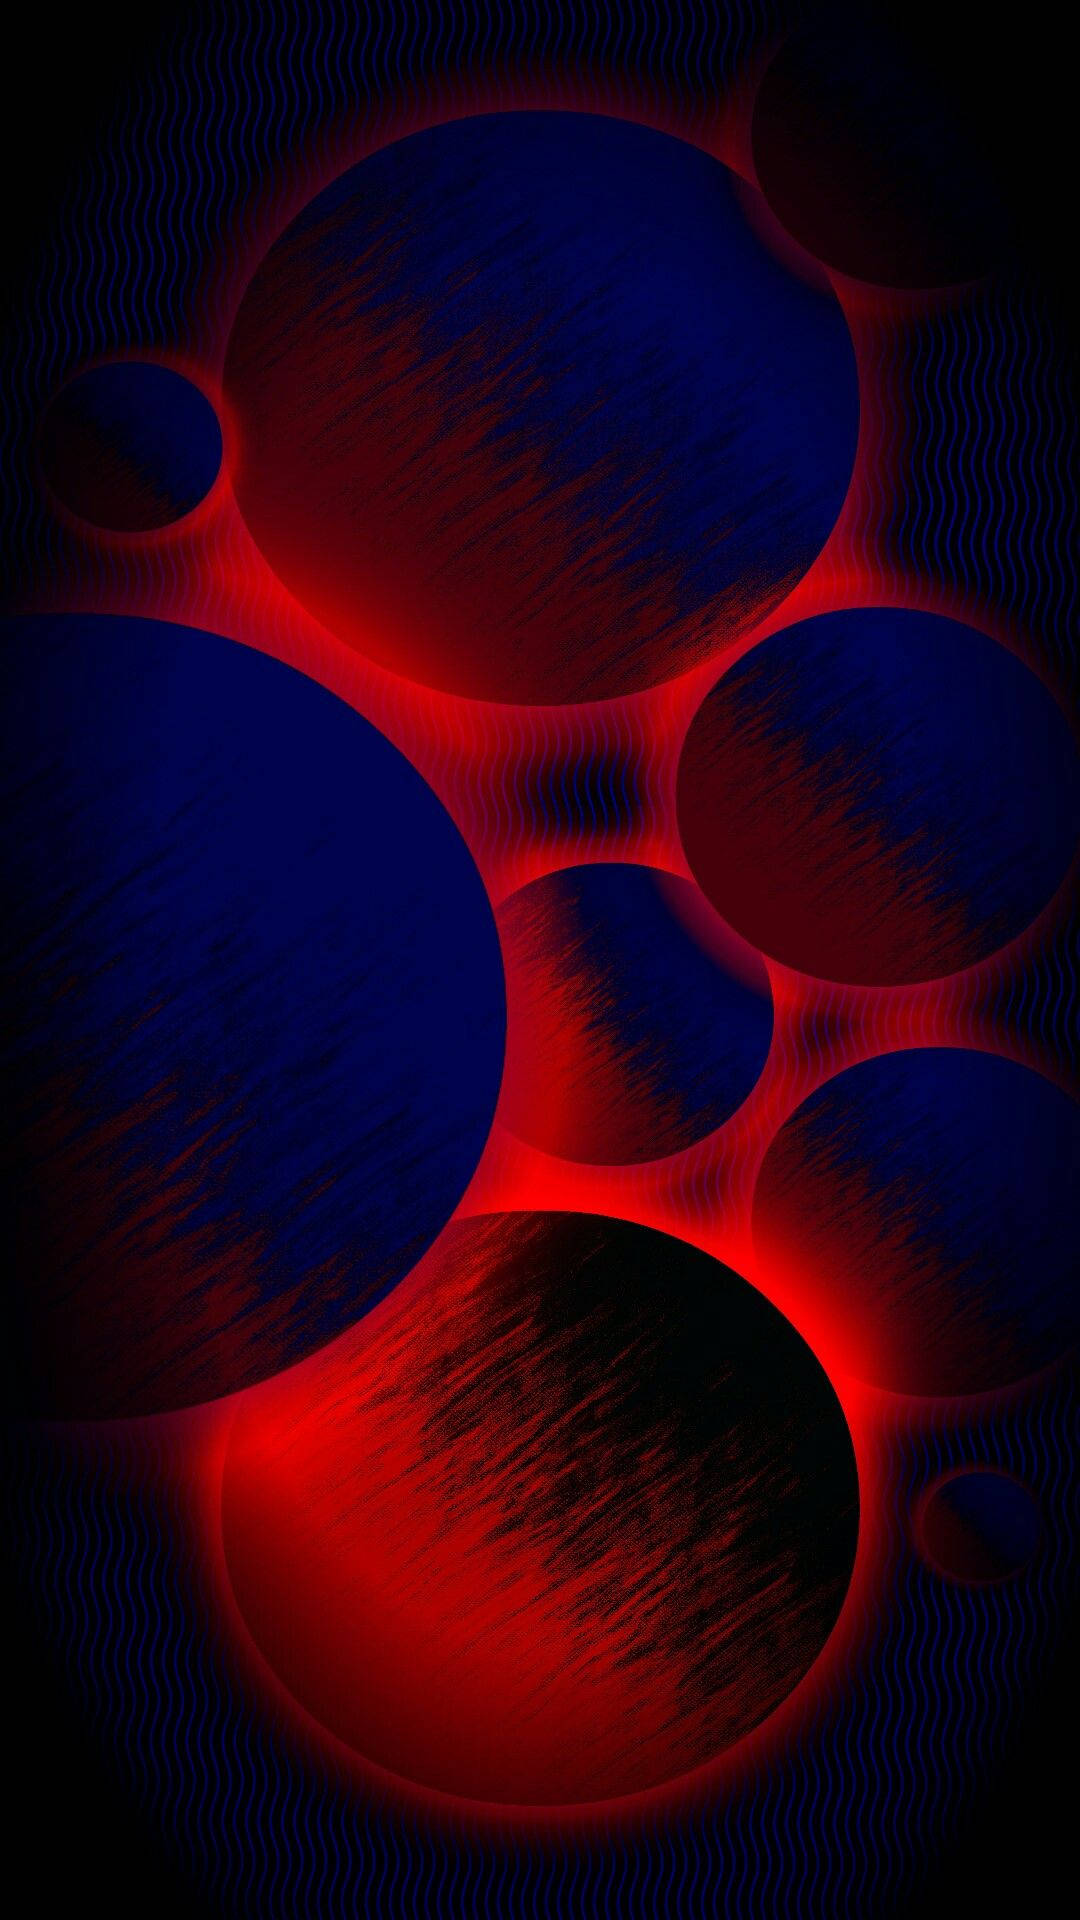 Red And Blue Spheres Wallpaper